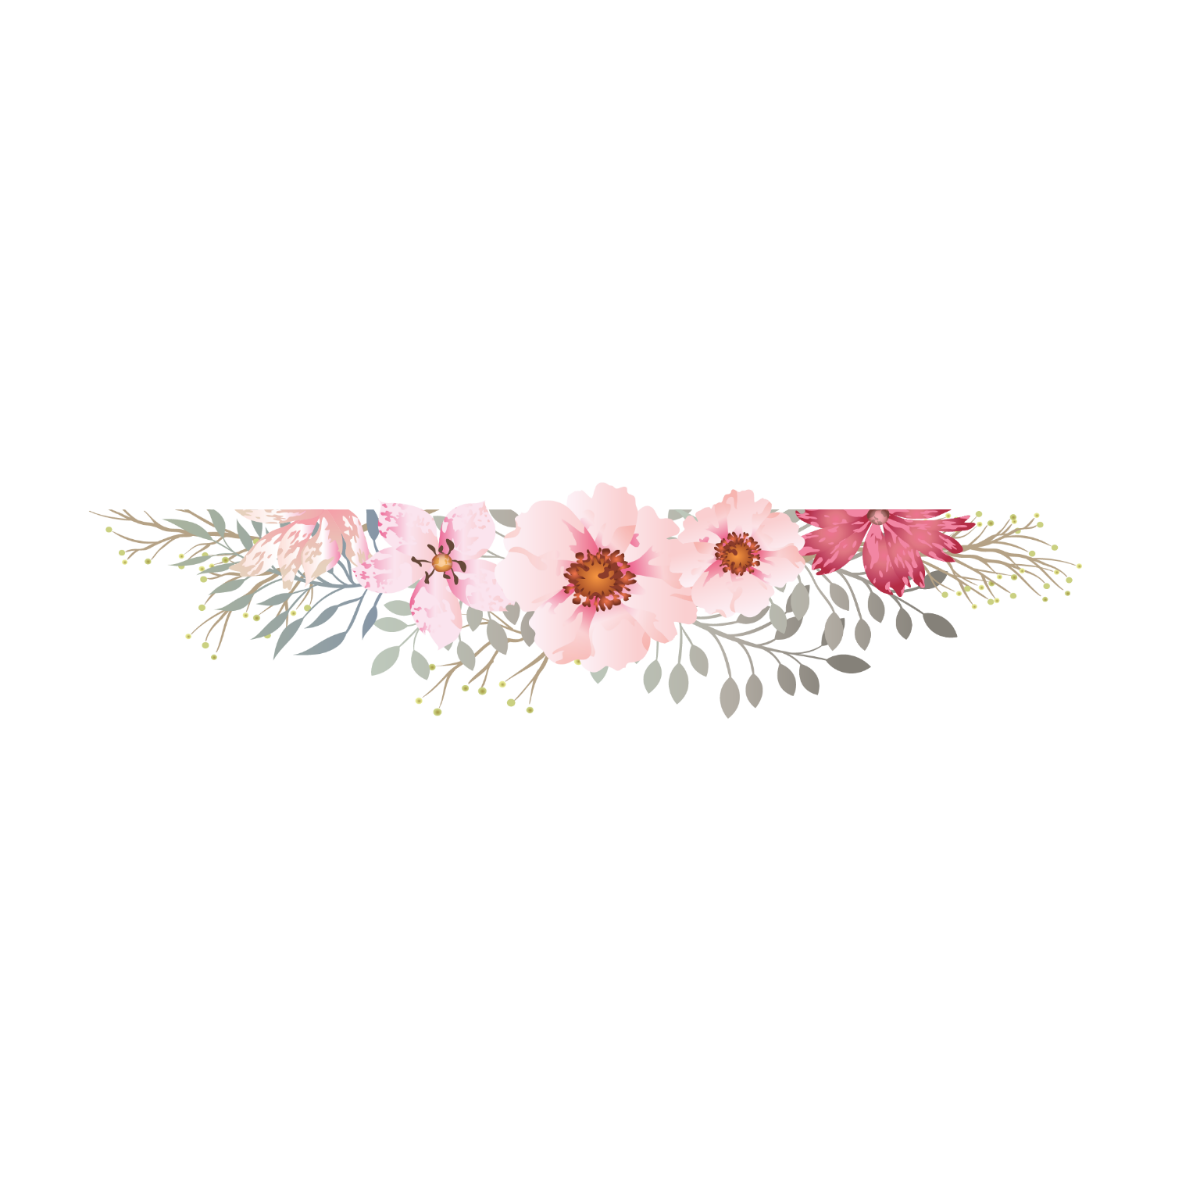 Free Pink Watercolor Floral